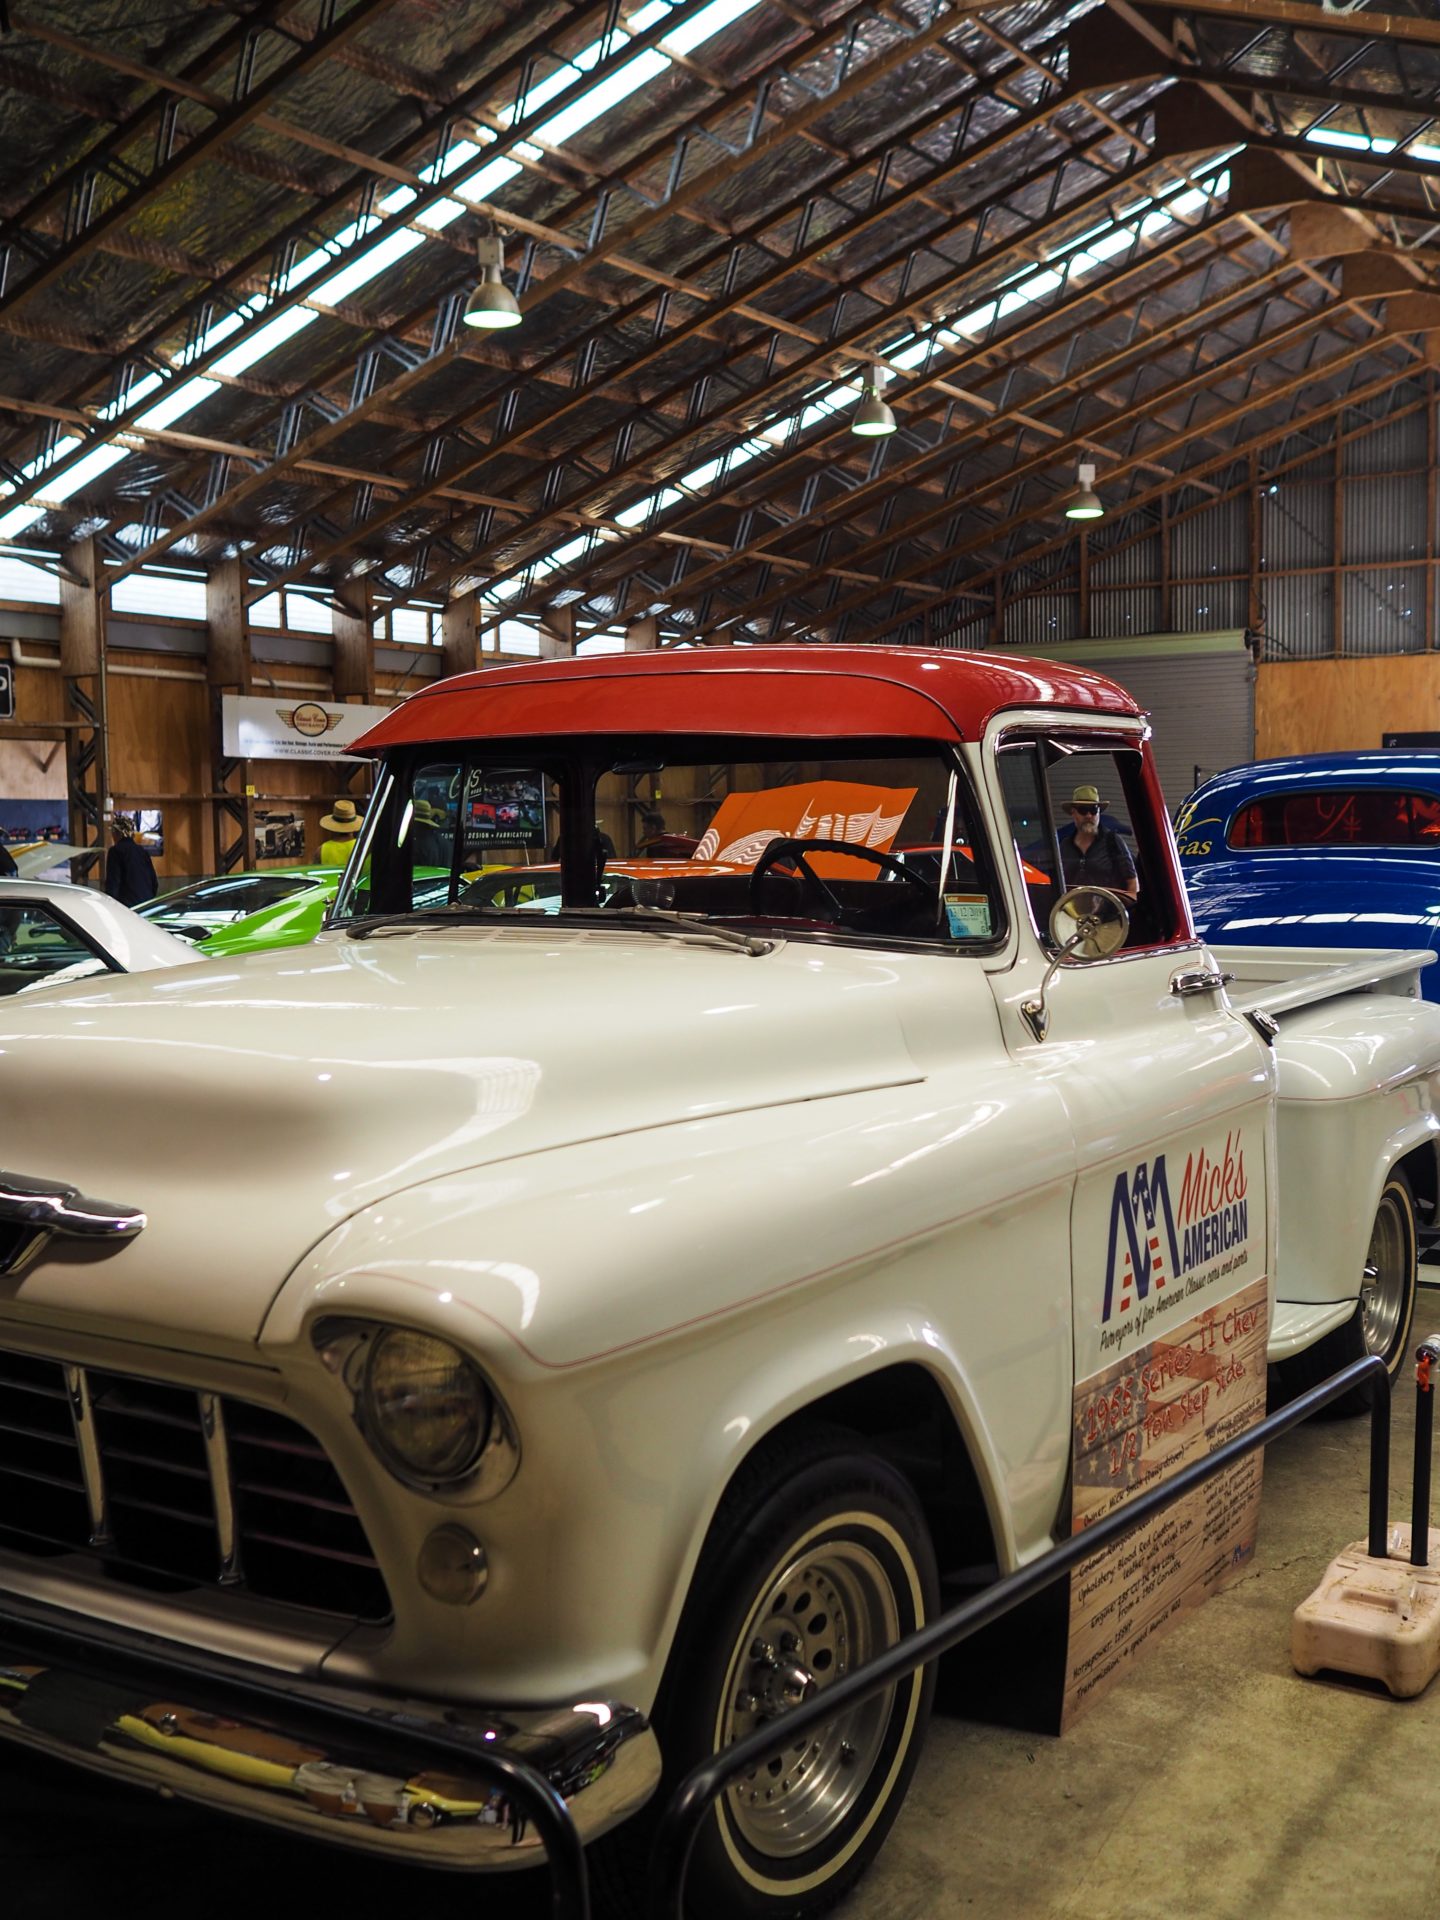 New Zealand Travel InspirationExploring the Kumeu Classic Car Show in Auckland; from Hot Rods to American Classics and everything inbetween. A great family day out in Auckland. #newzealand #auckland #80pairsofshoes